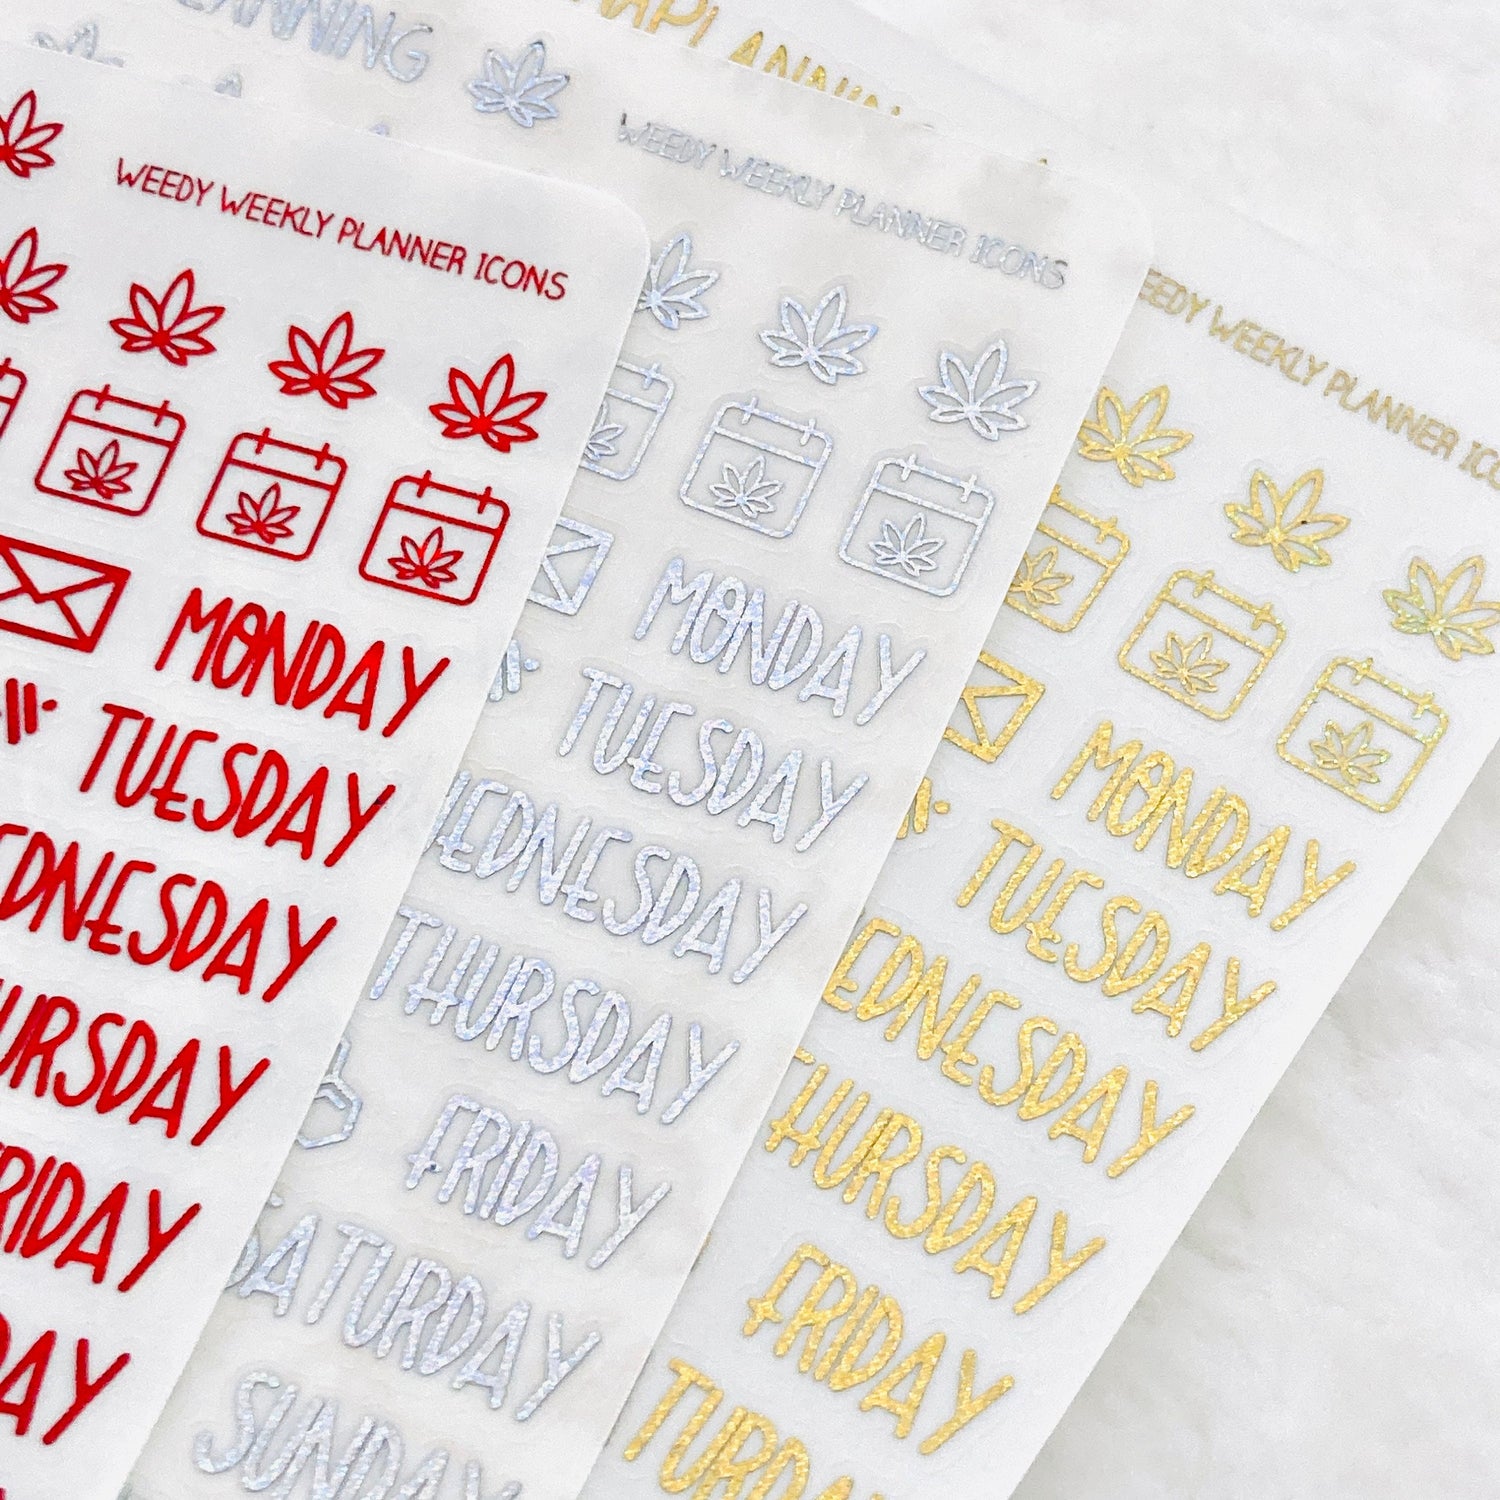 CLEAR FOILED Weedy Weekly Planner Icons and Deco - Style 3 | Weekly sticker kit functional icon stickers for planning and bullet journal